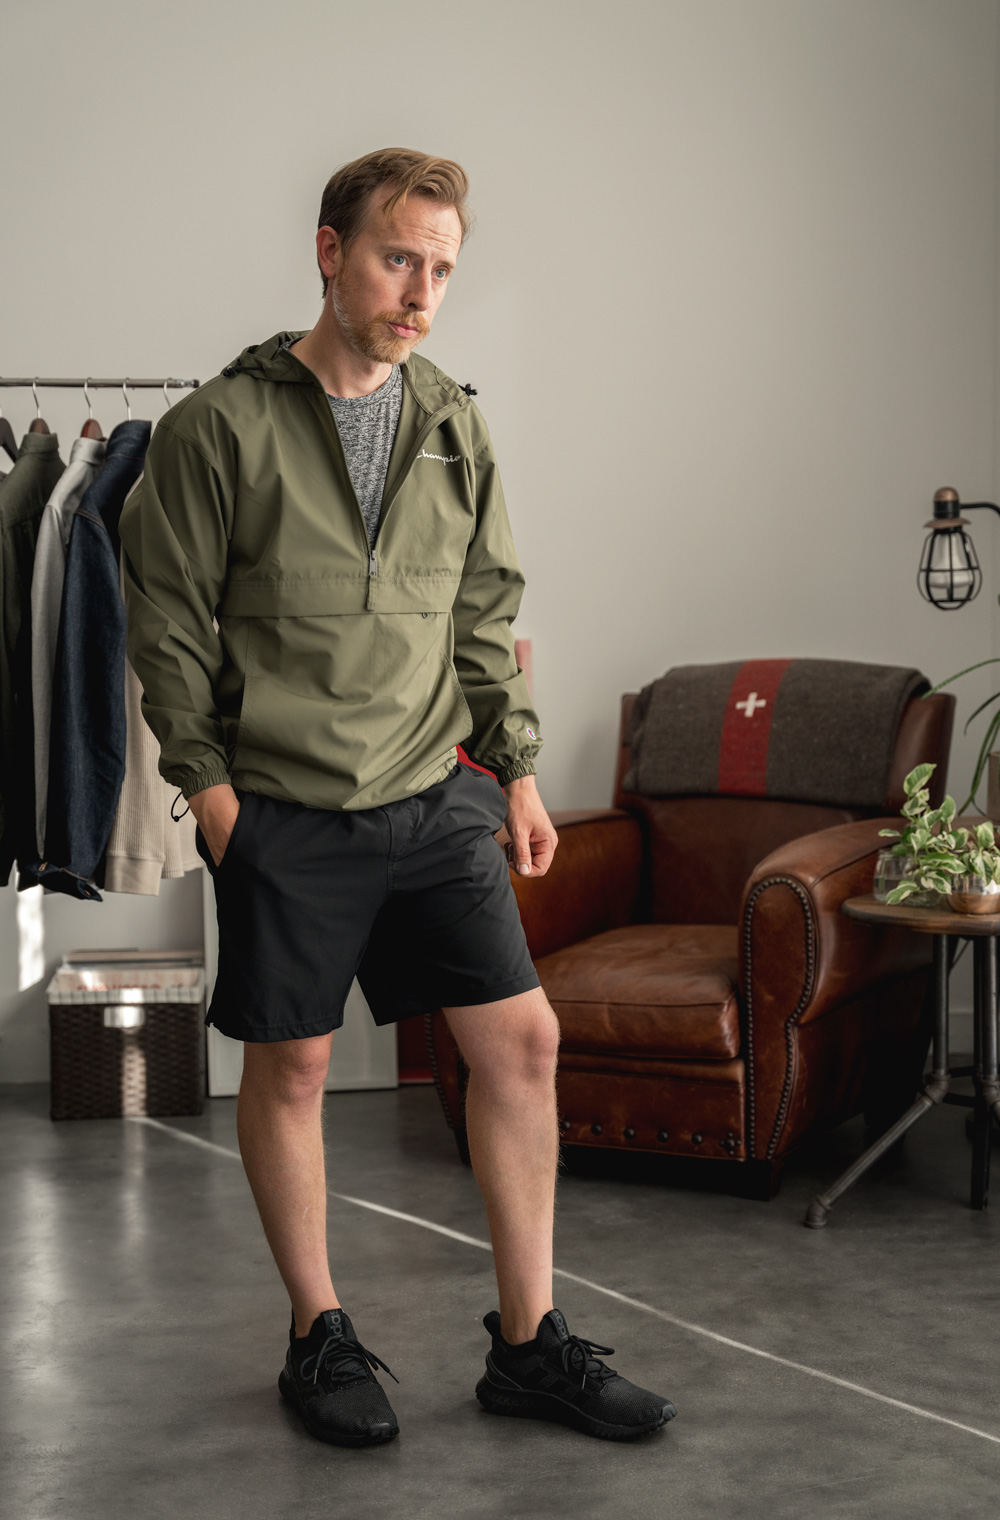 Modern sportswear with a green blazer, gray performance shirt, black track shorts and black Adidas trainers